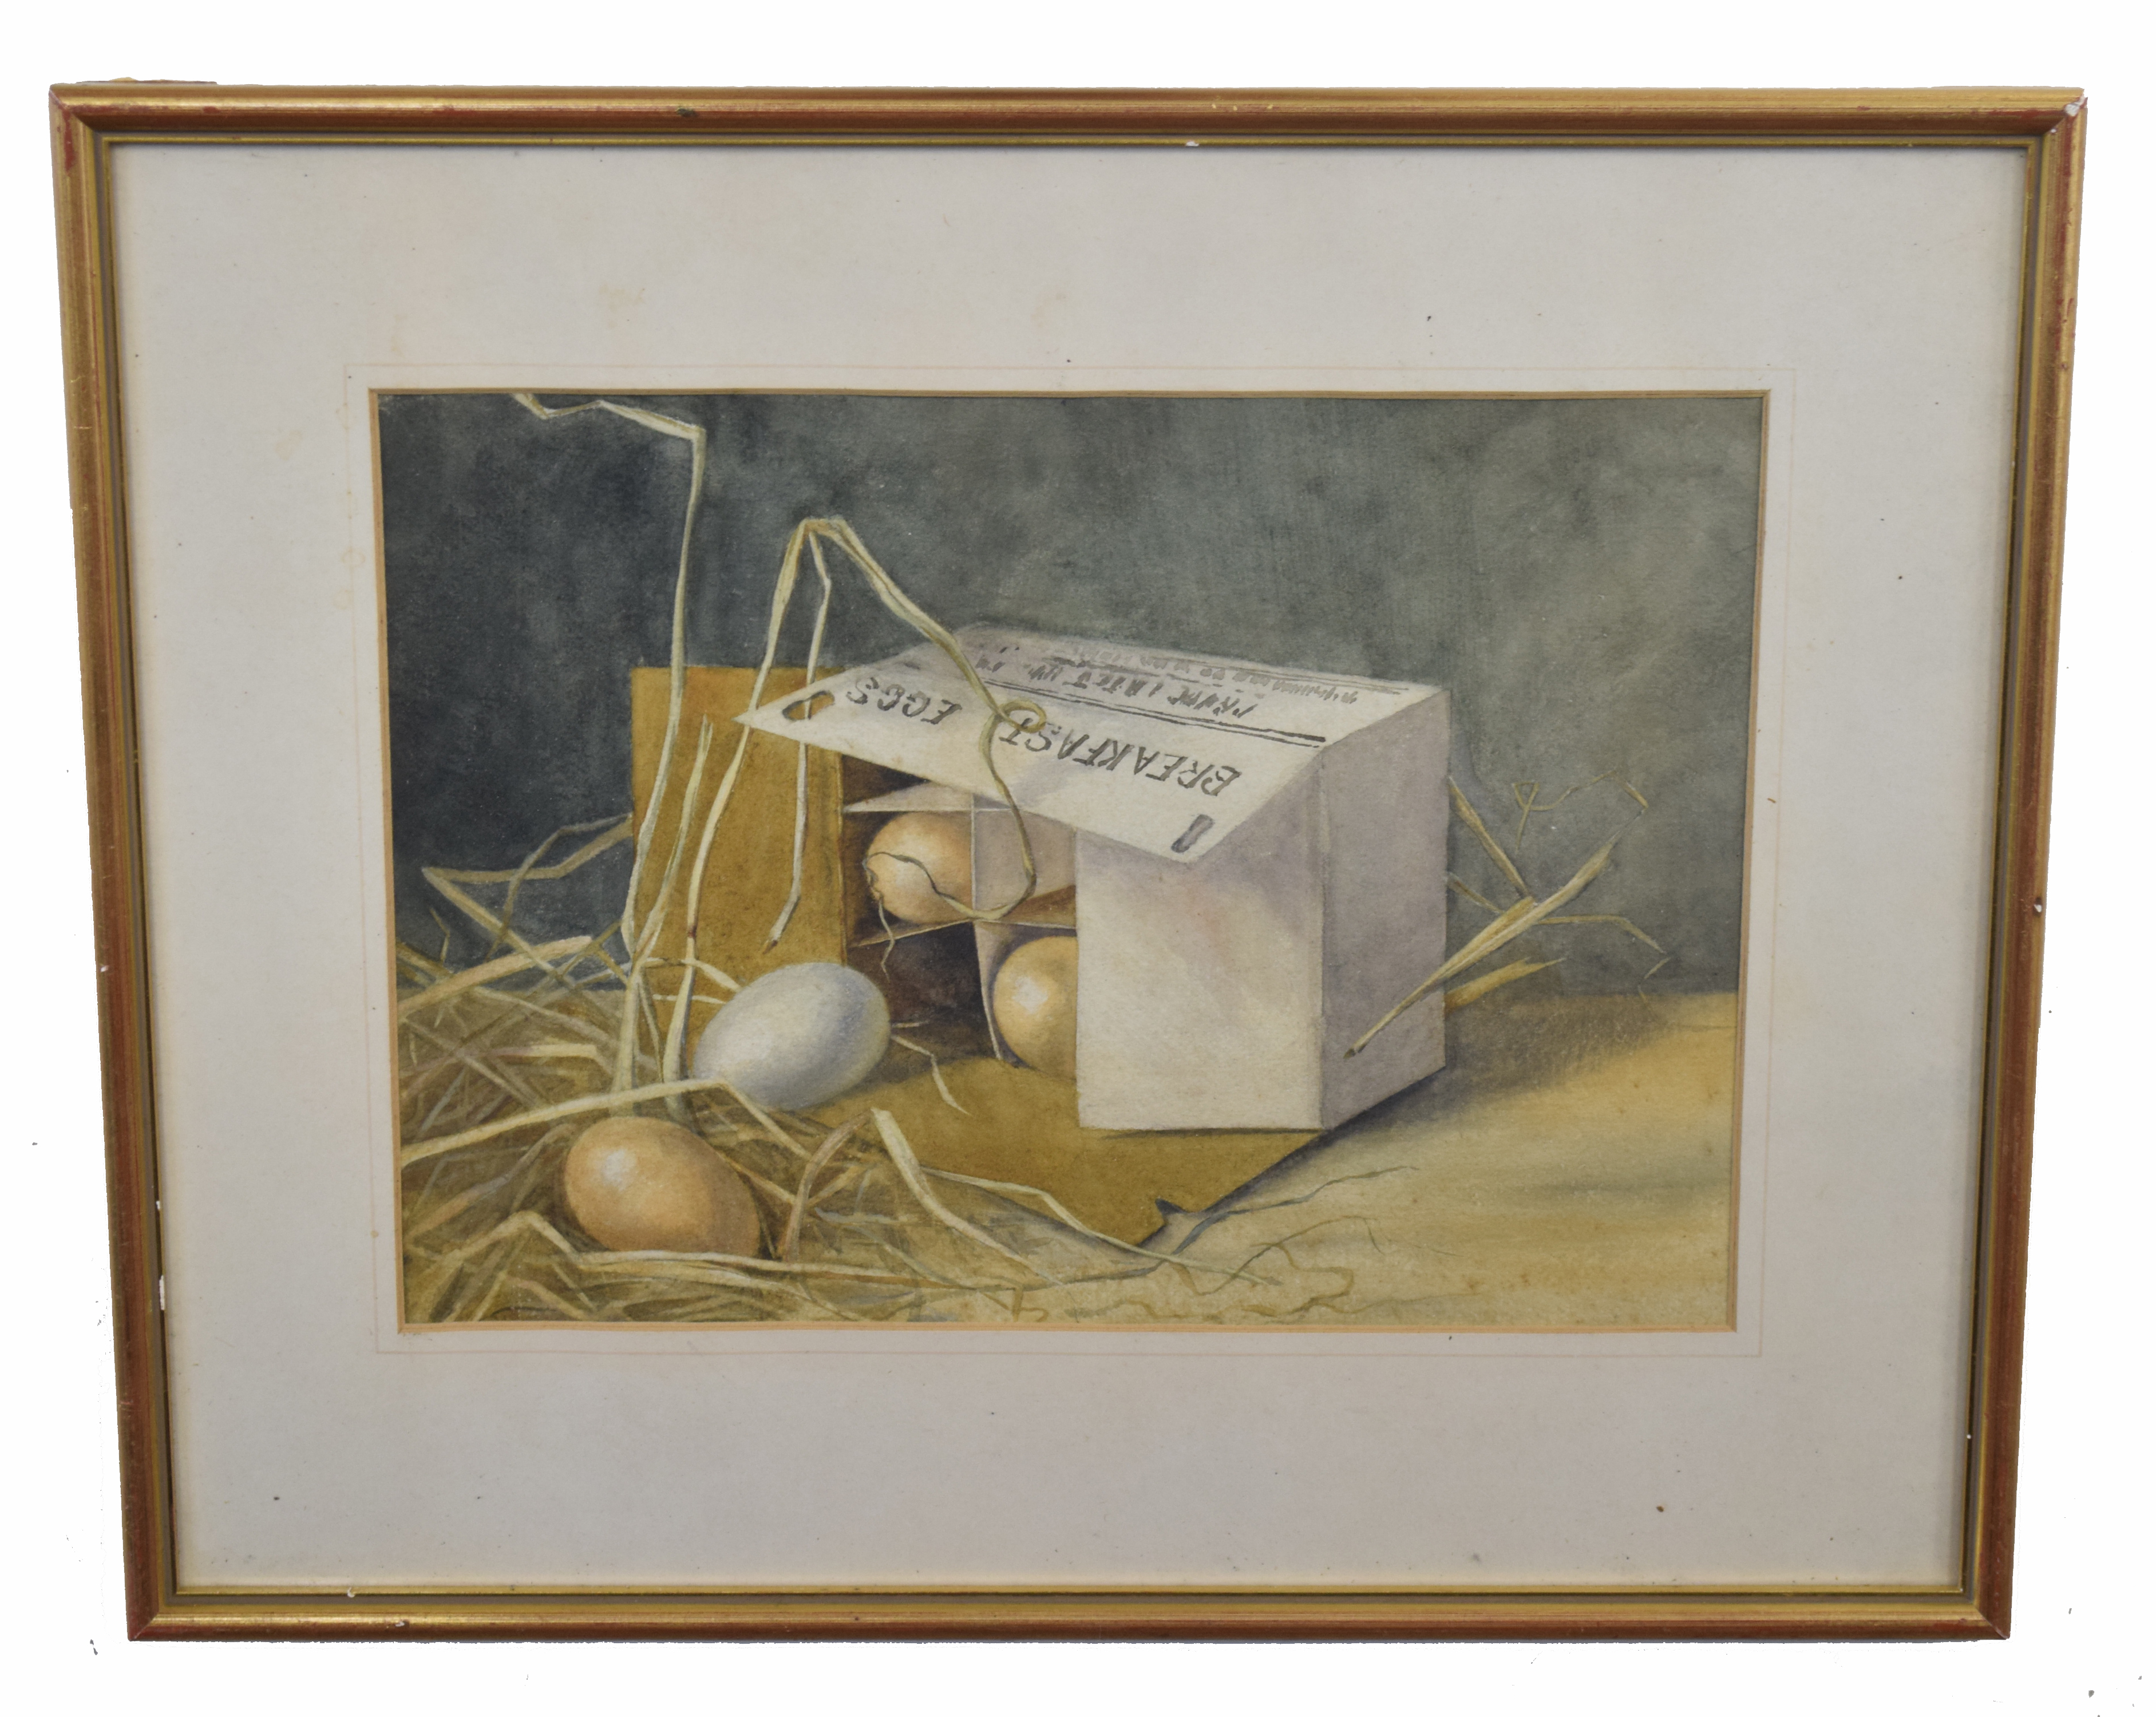 British, 20th century, Still Life study of a box of breakfast eggs overturned, watercolour on paper,